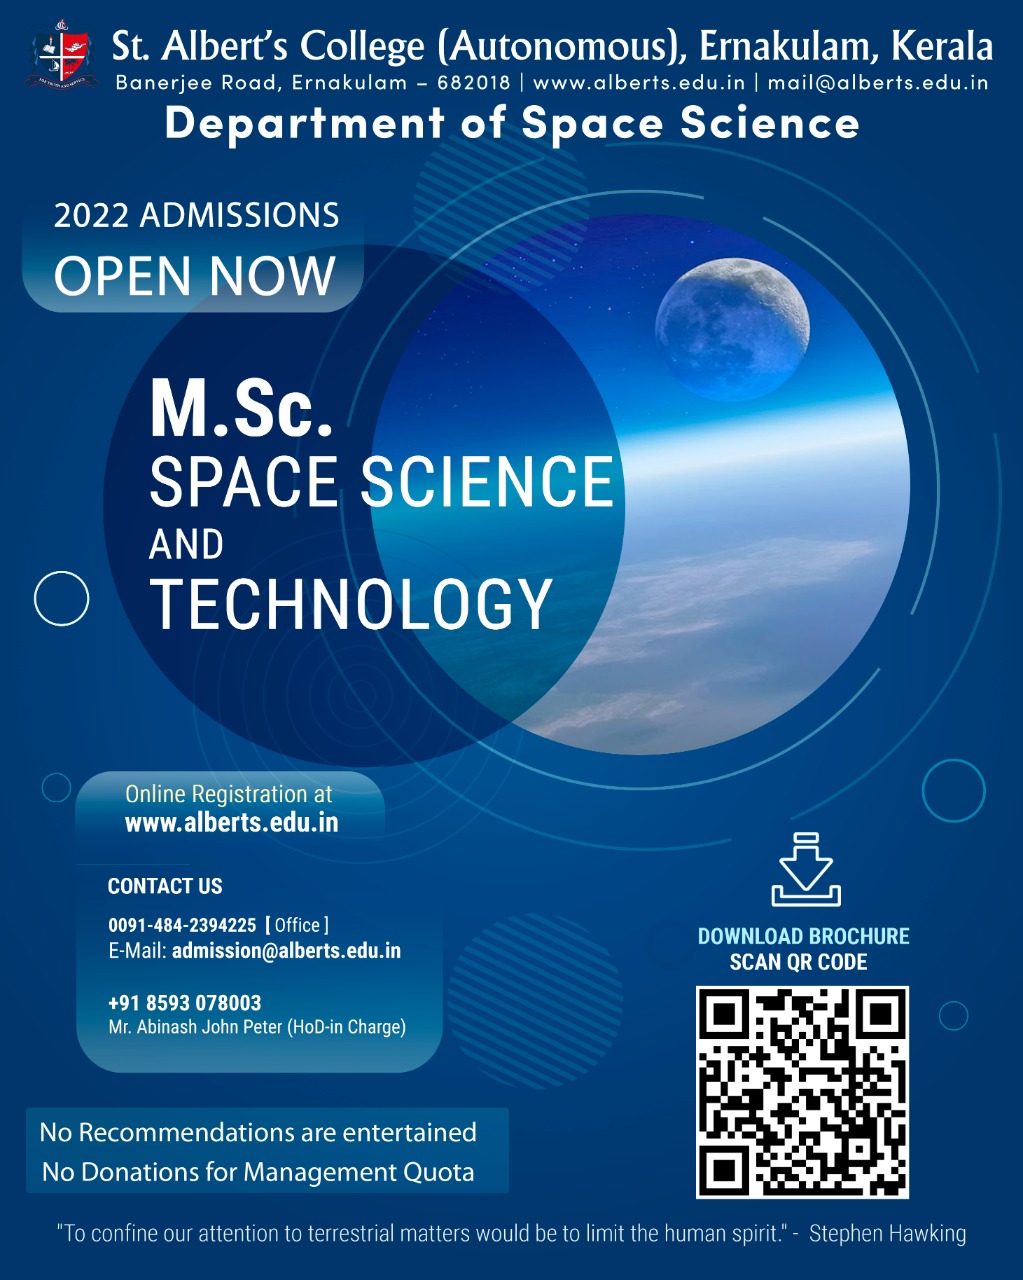 Admissions are now open for M Sc Space Science & Technology